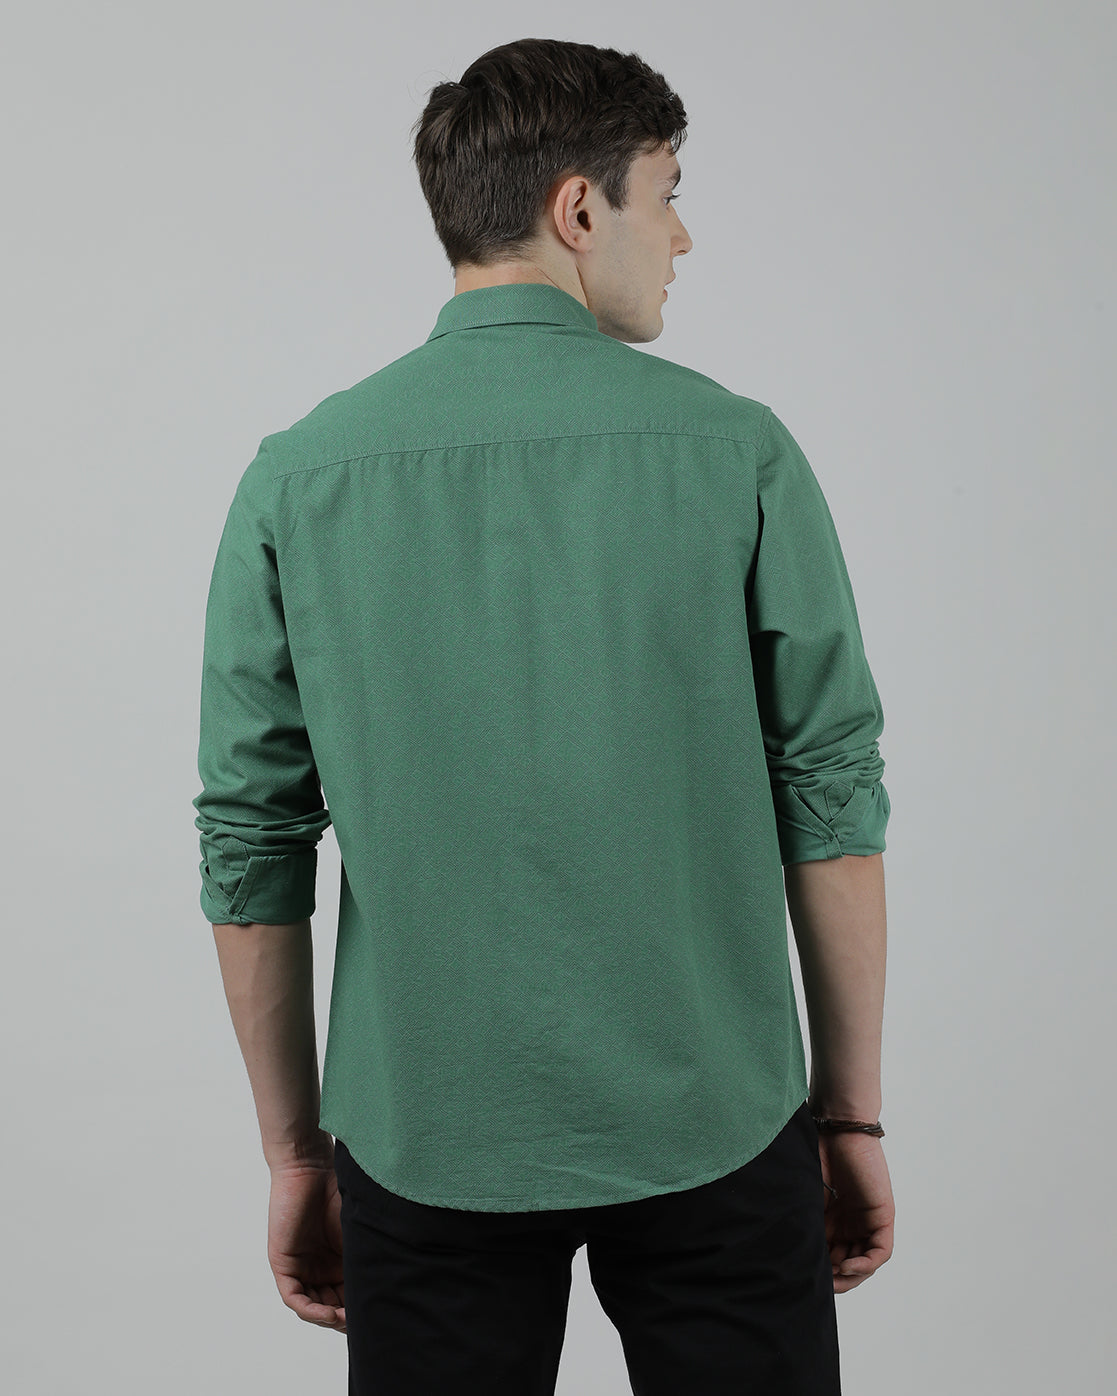 Casual Full Sleeve Comfort Fit Printed Shirt Green with Collar for Men